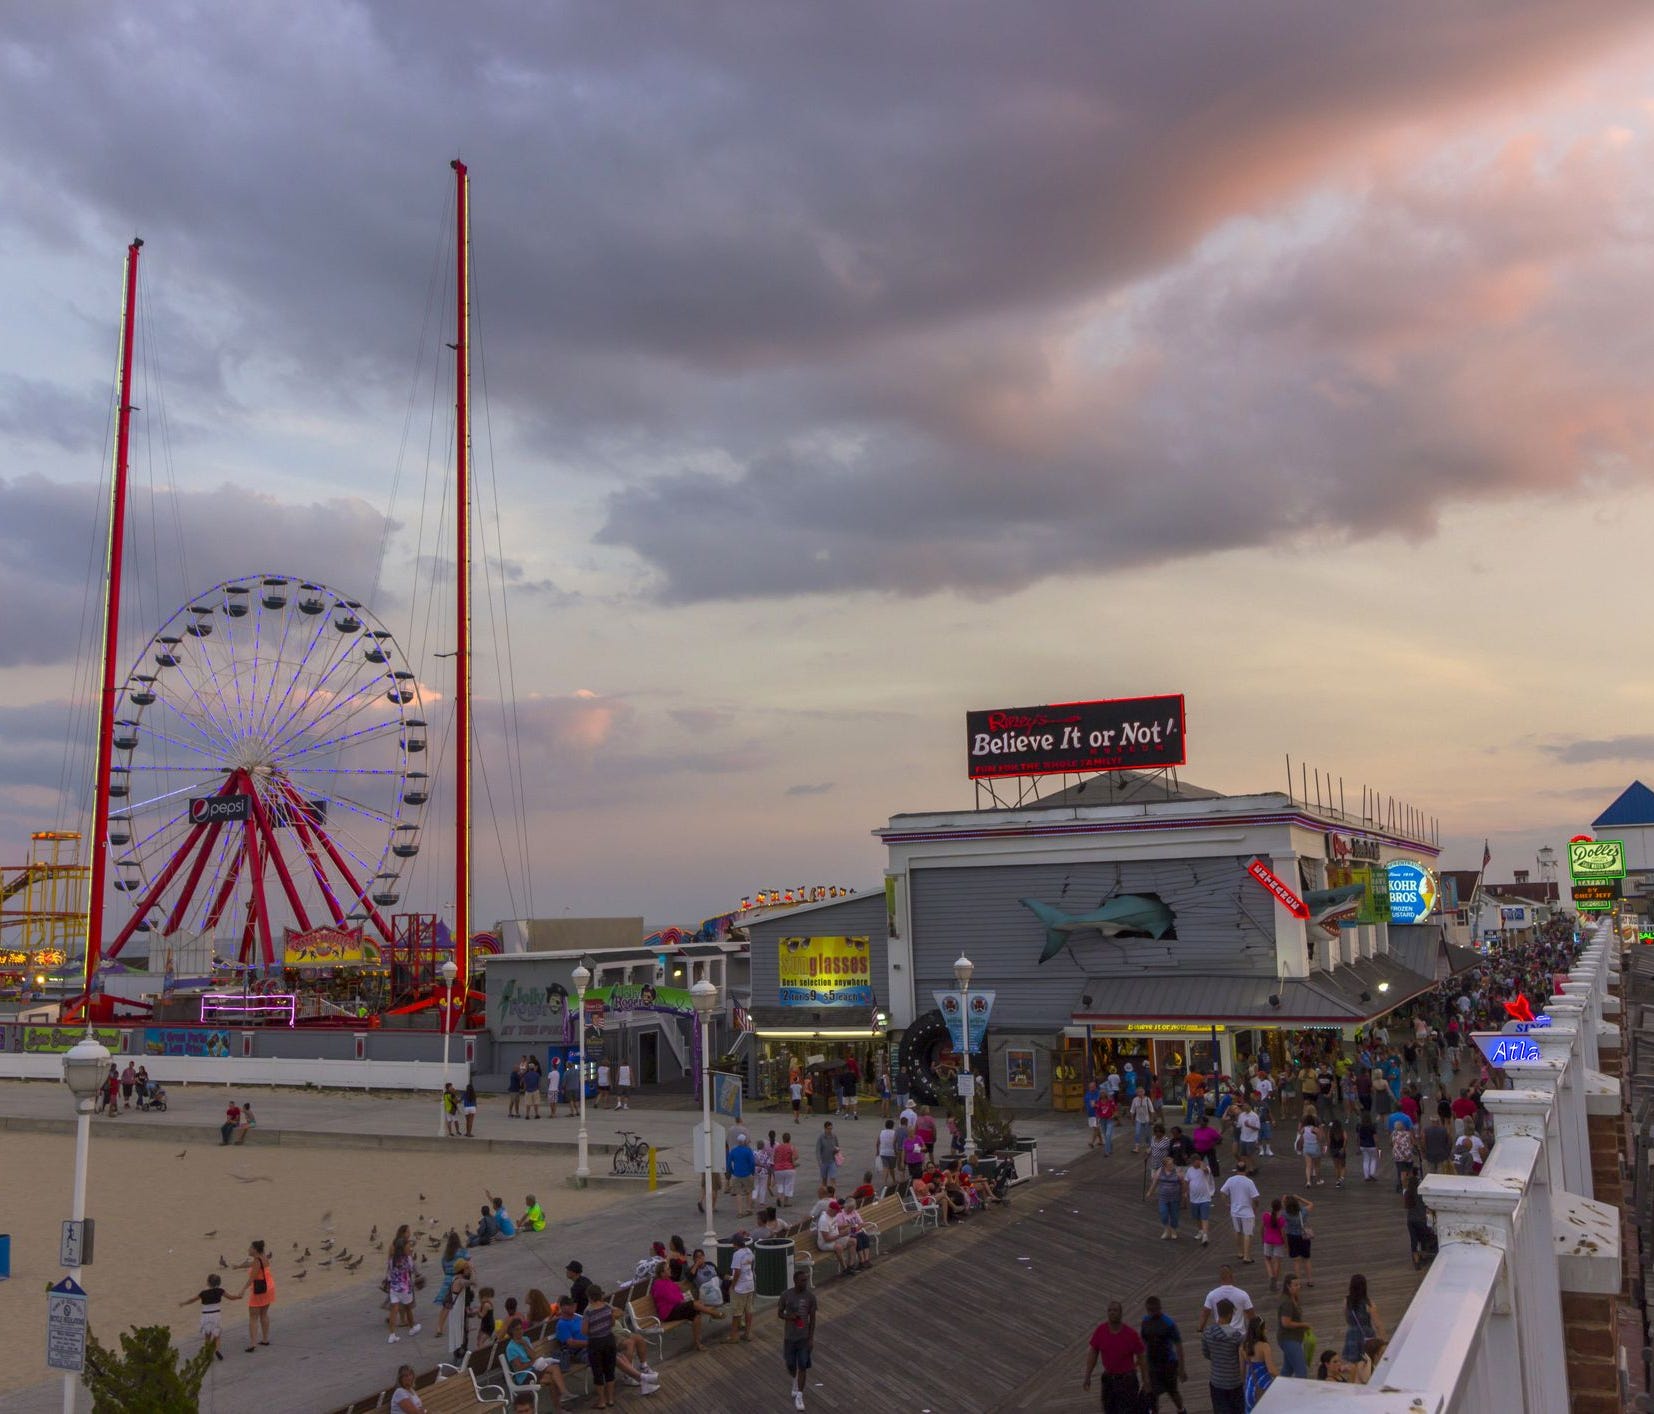 The long wooden boardwalk is Ocean City's iconic gathering place, lined with vintage arcades for games and rides, souvenir shops, and all the deliciously fried food you can eat.